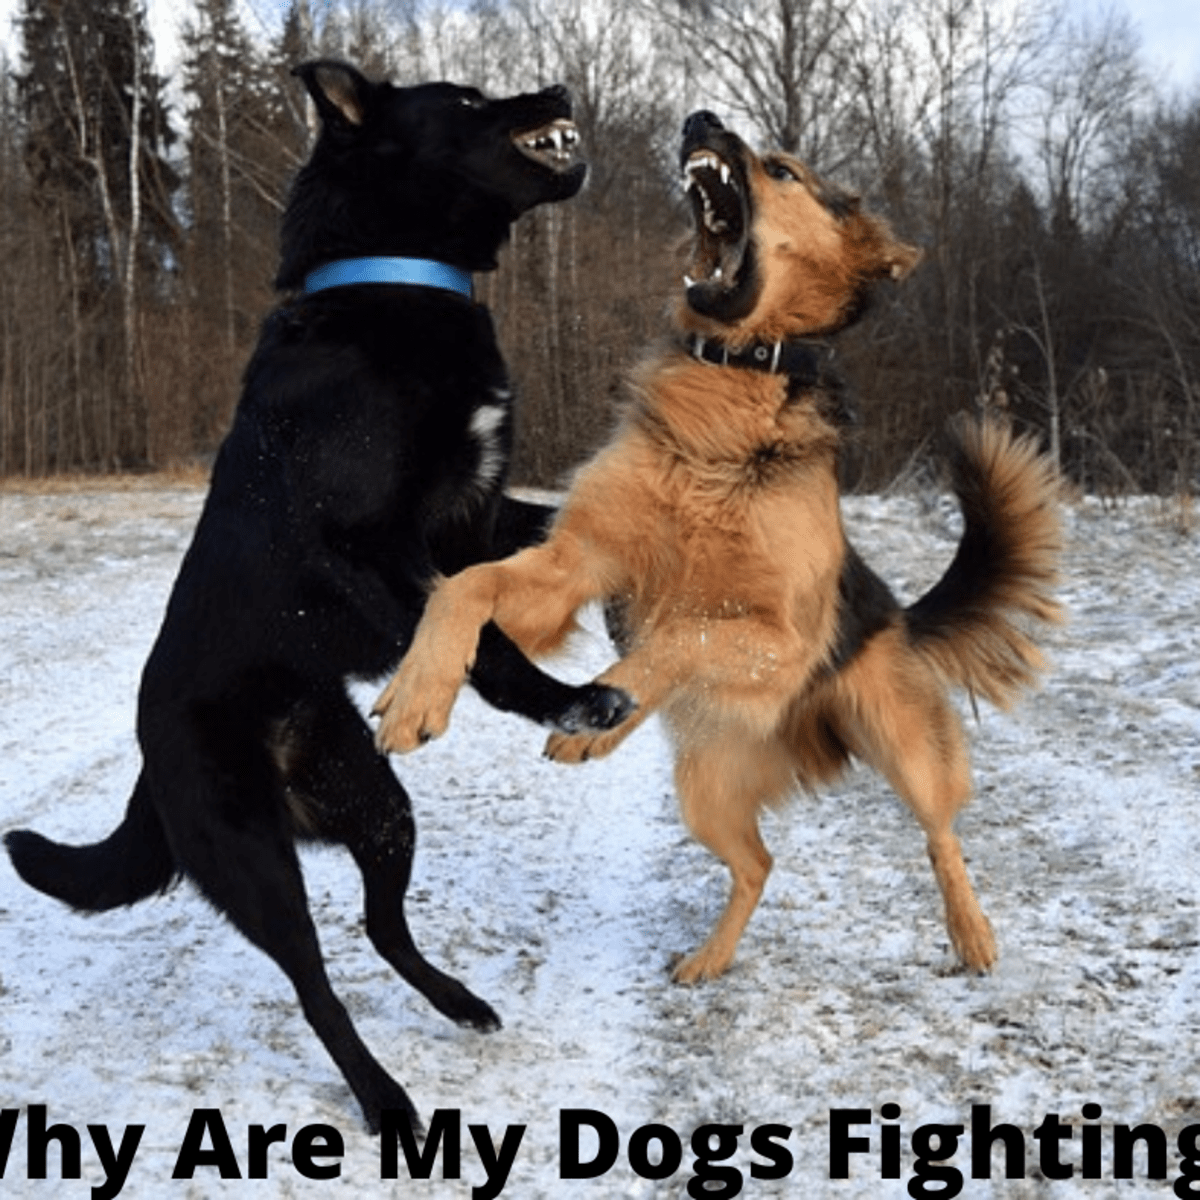 42 Top Pictures Older Dog Attacking New Puppy - How To Stop A Cat From Attacking Dogs Pethelpful By Fellow Animal Lovers And Experts